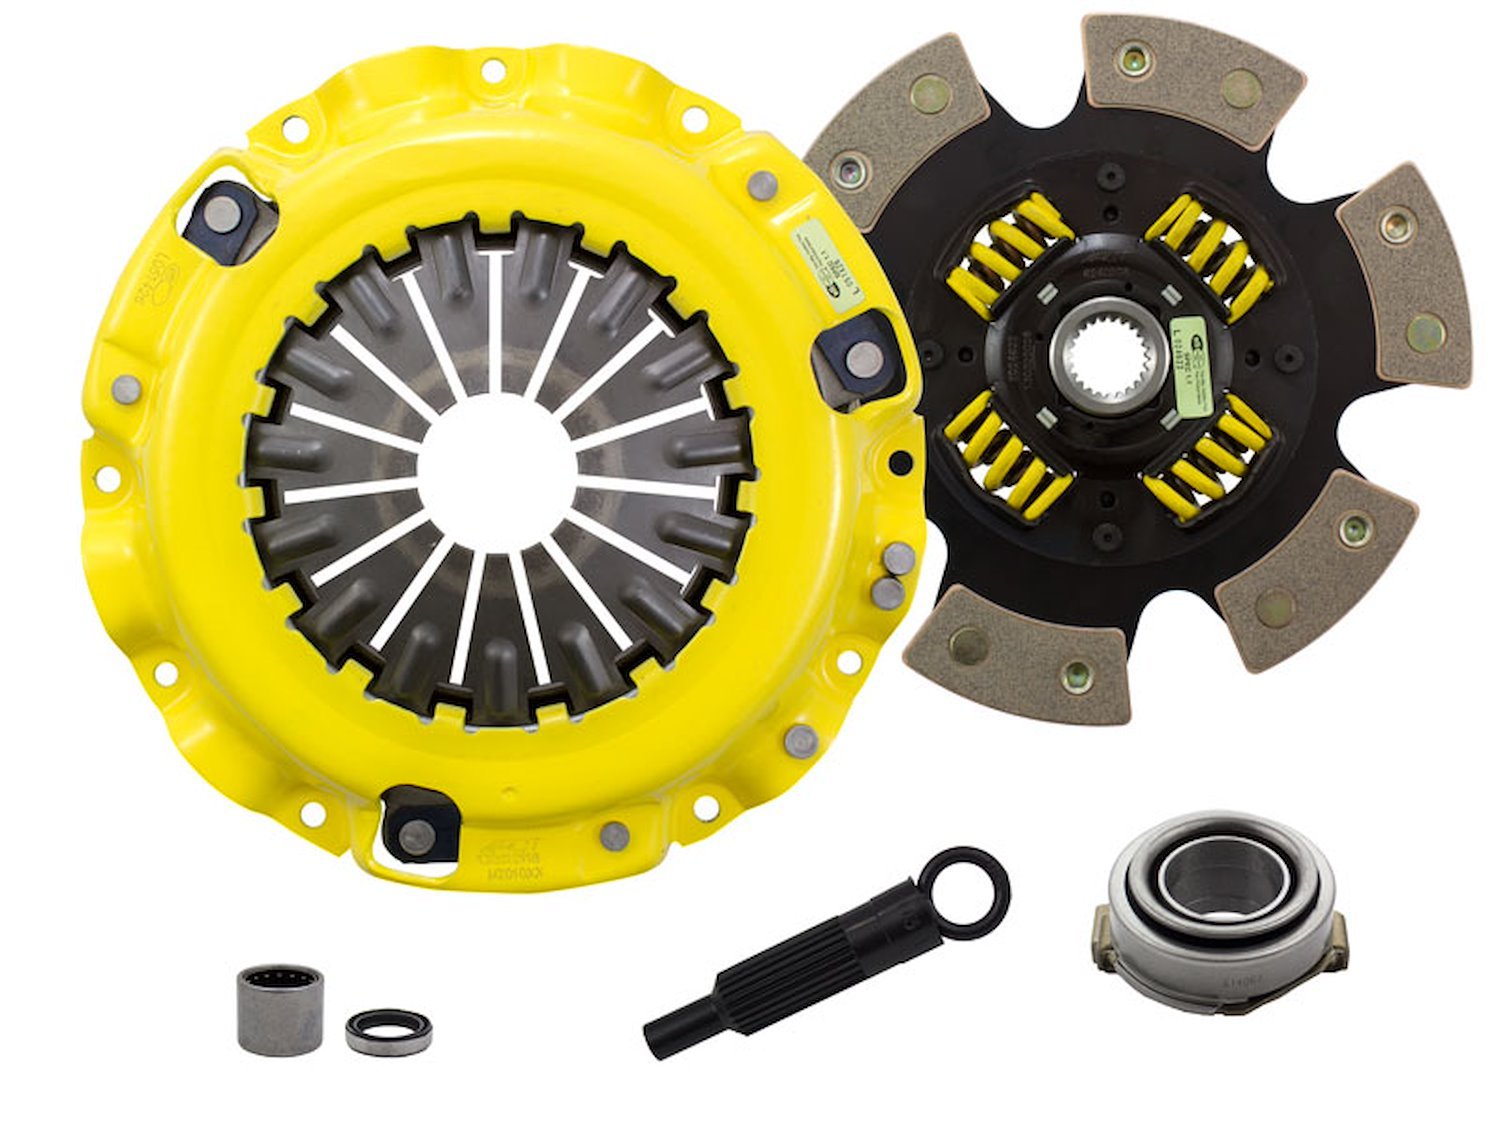 MaXX/Race Sprung 6-Pad Transmission Clutch Kit Fits Select Ford/Lincoln/Mercury/Mazda